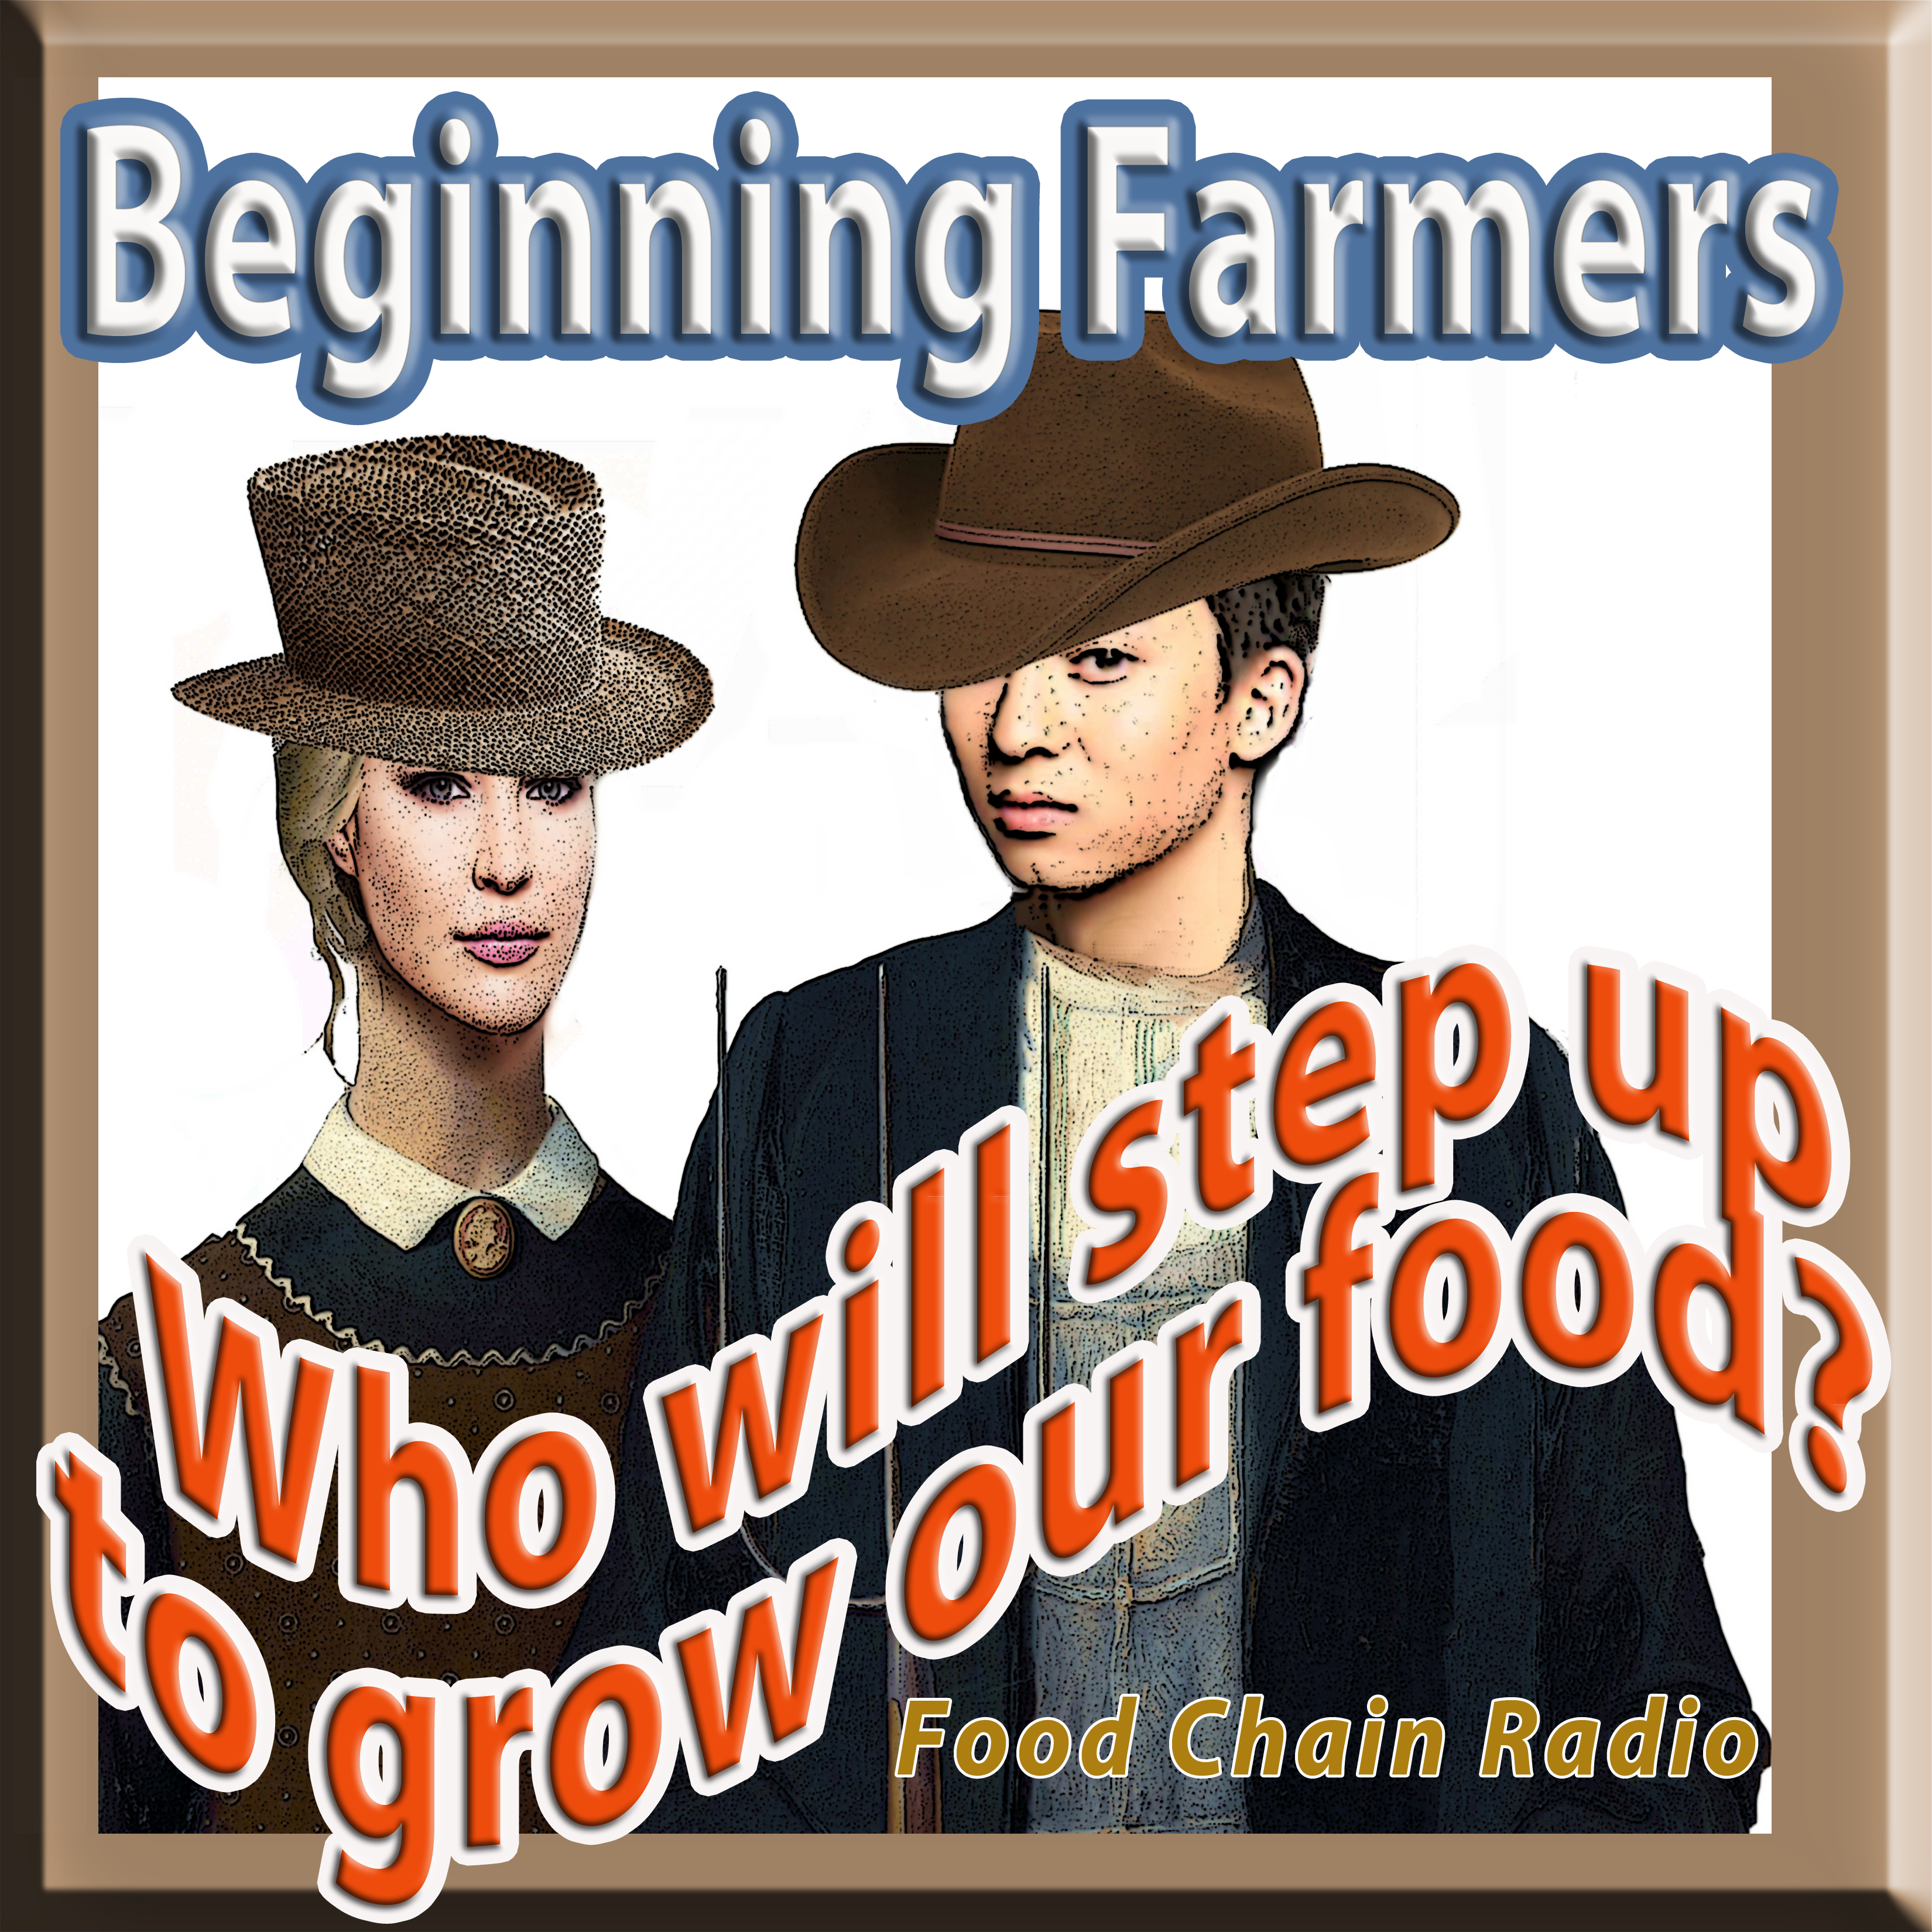 Michael Olson Food Chain Radio: BEGINNING FARMERS – Who will step up among our young will step up to grow our food?